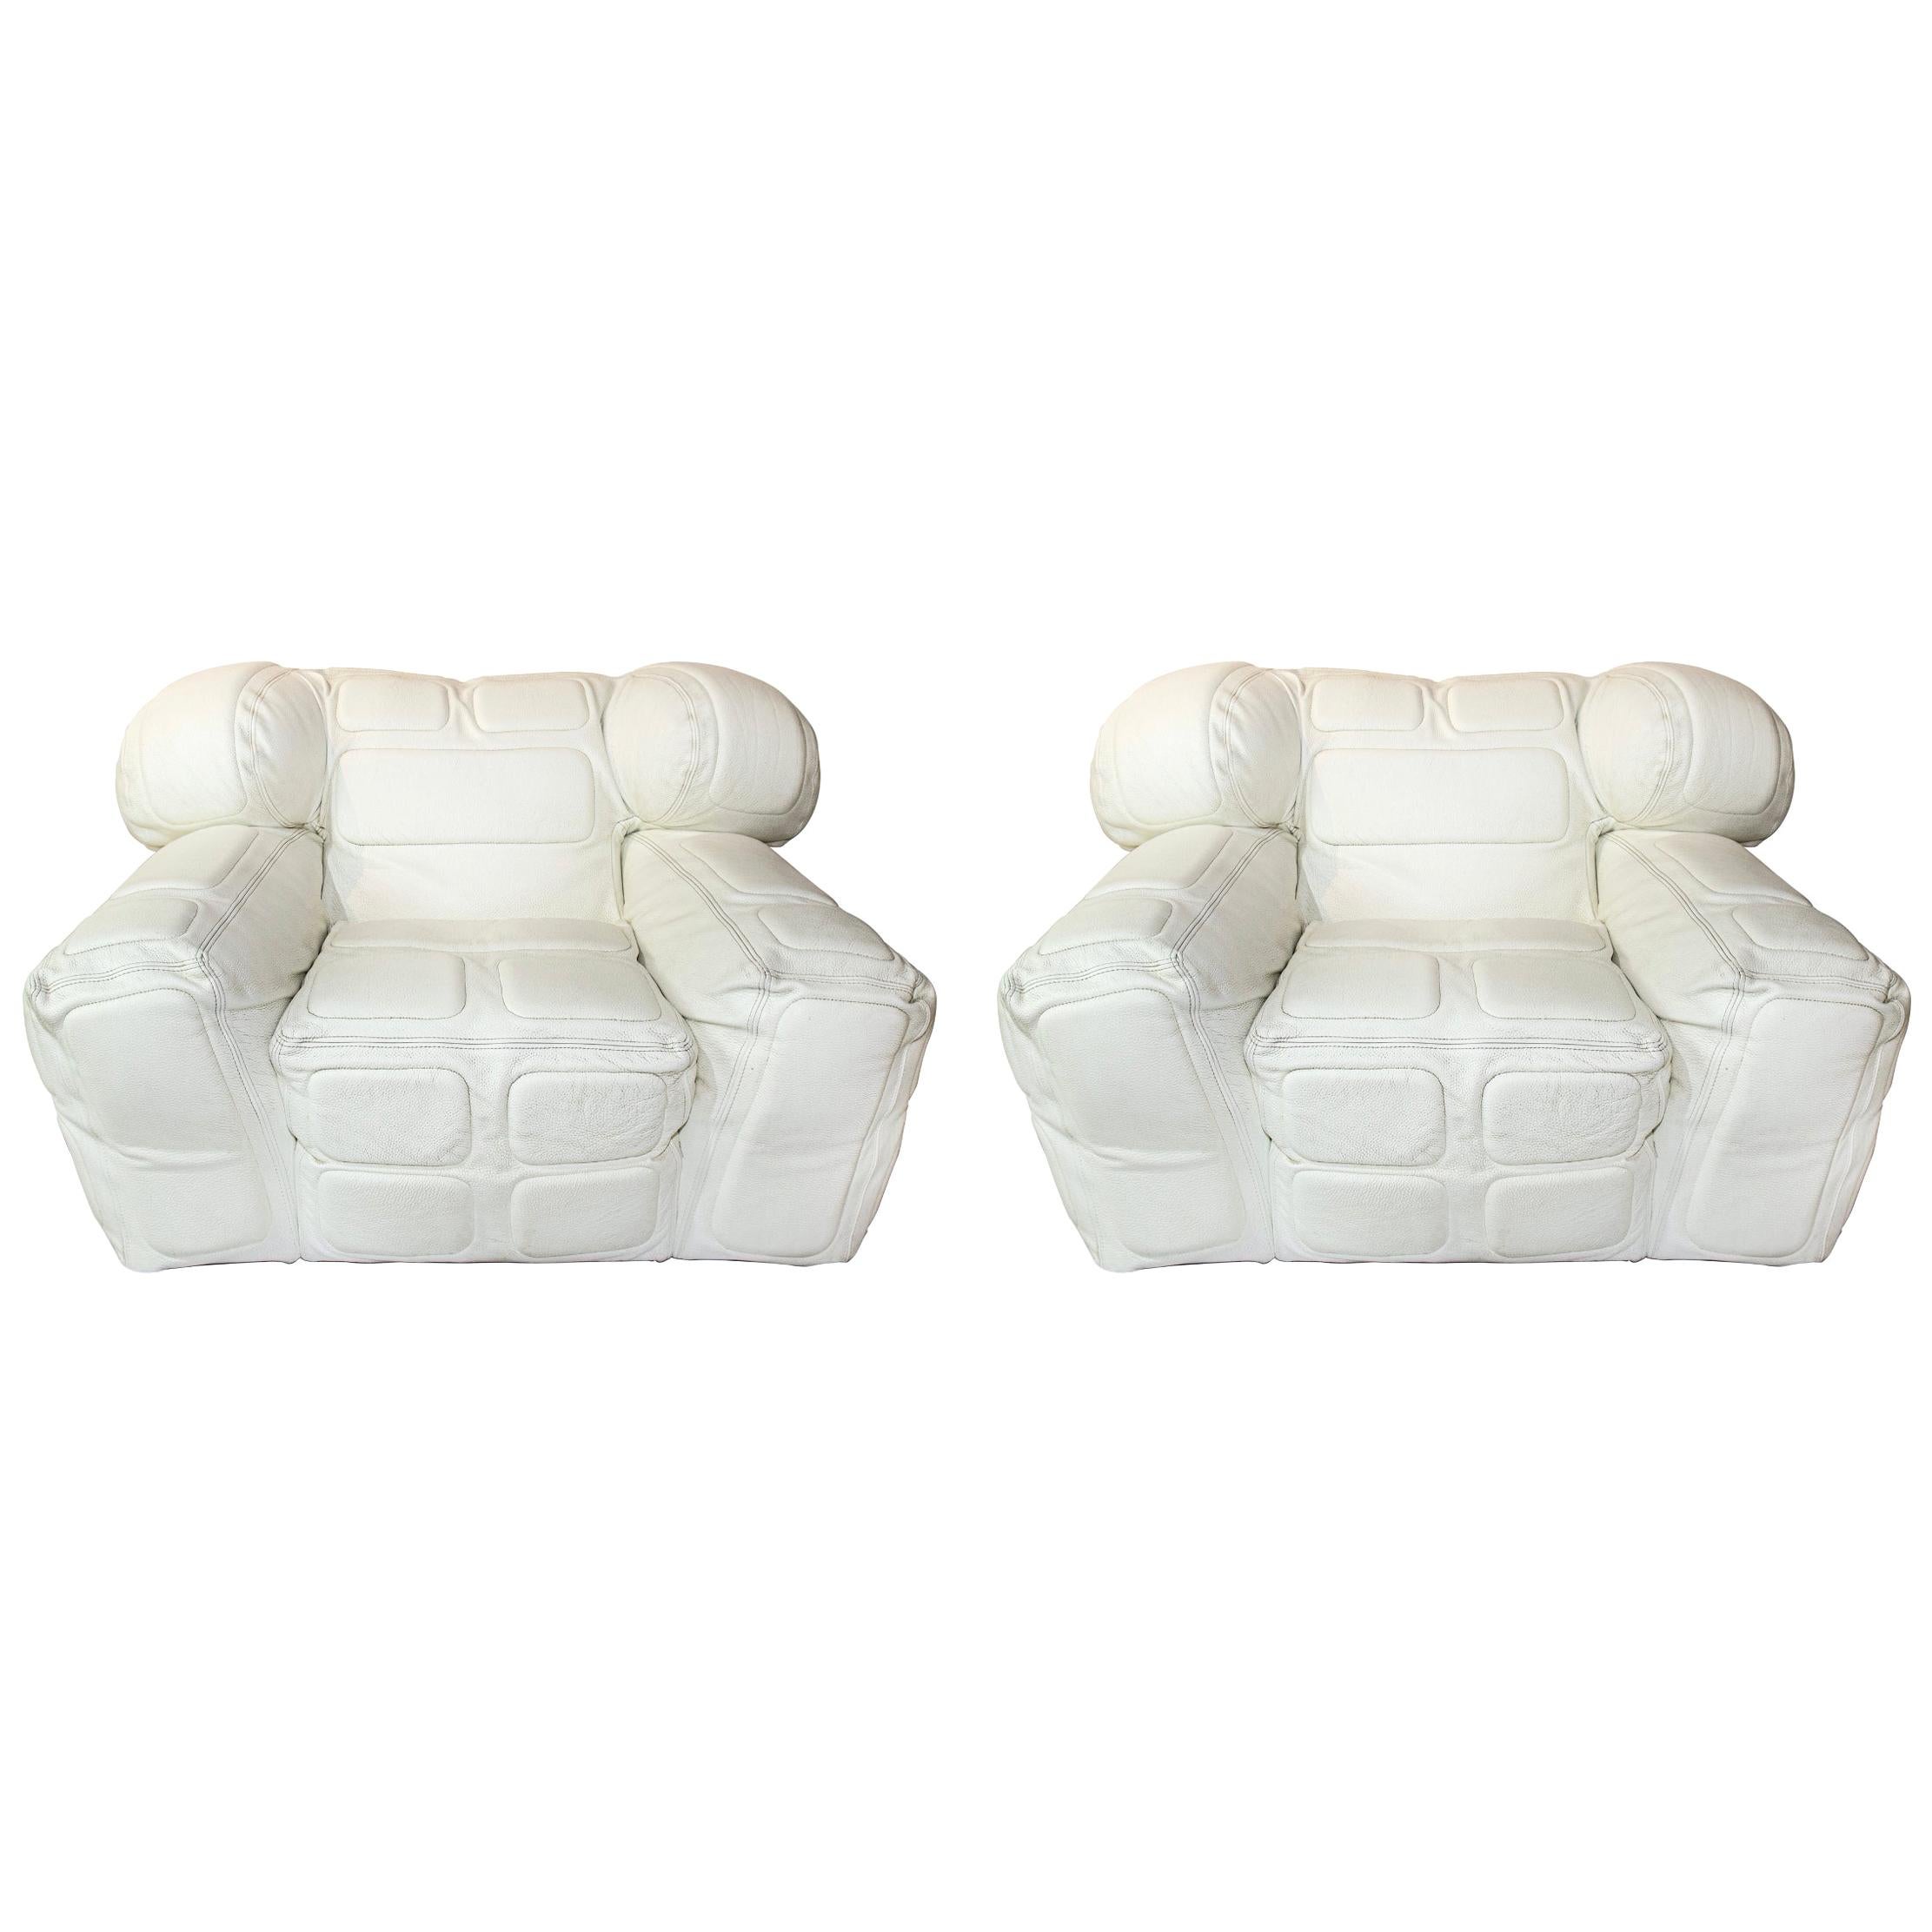 Pair of White Leather Armchairs, by Arik Ben Simhon, 2002